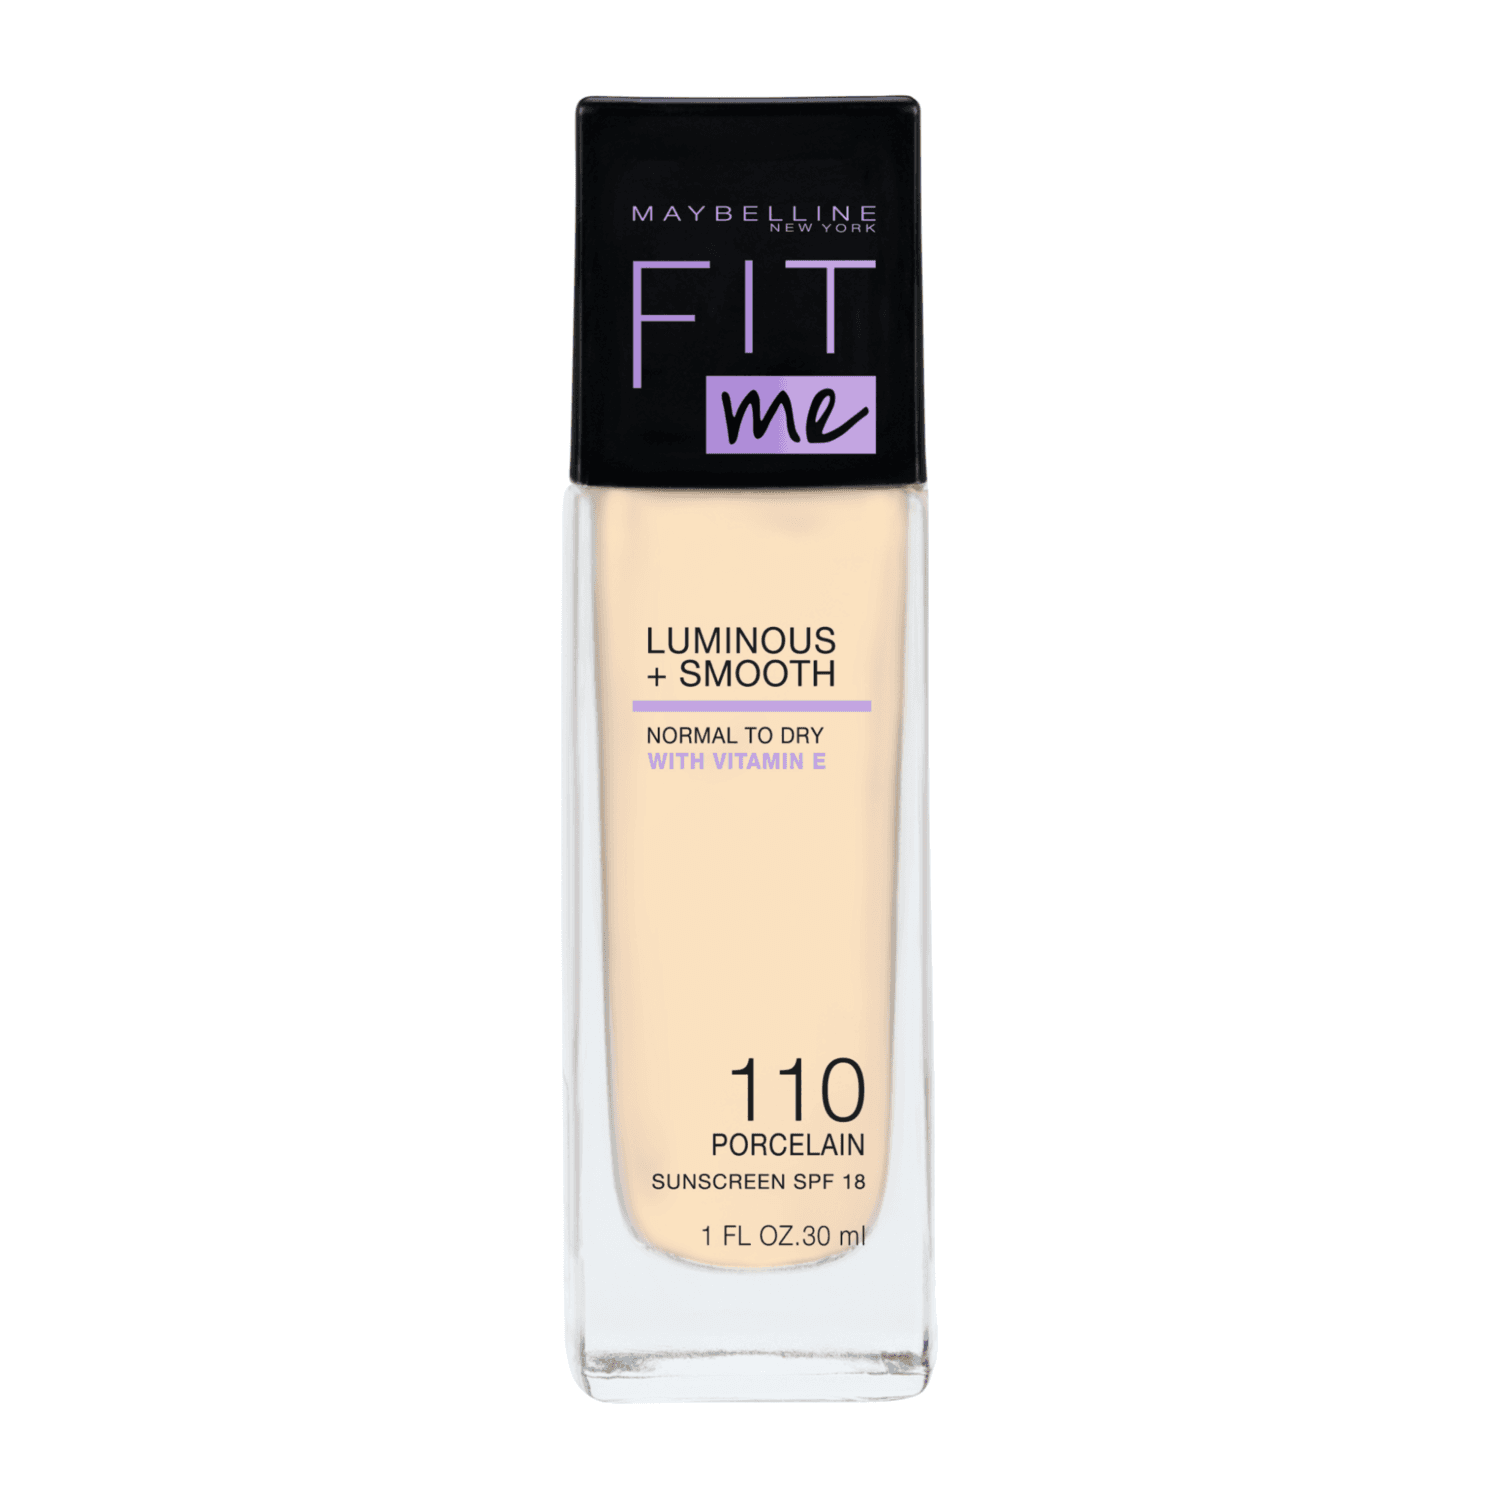 Maybelline Fit me Luminous + Smooth 110 Porcelain make-up 30 ml